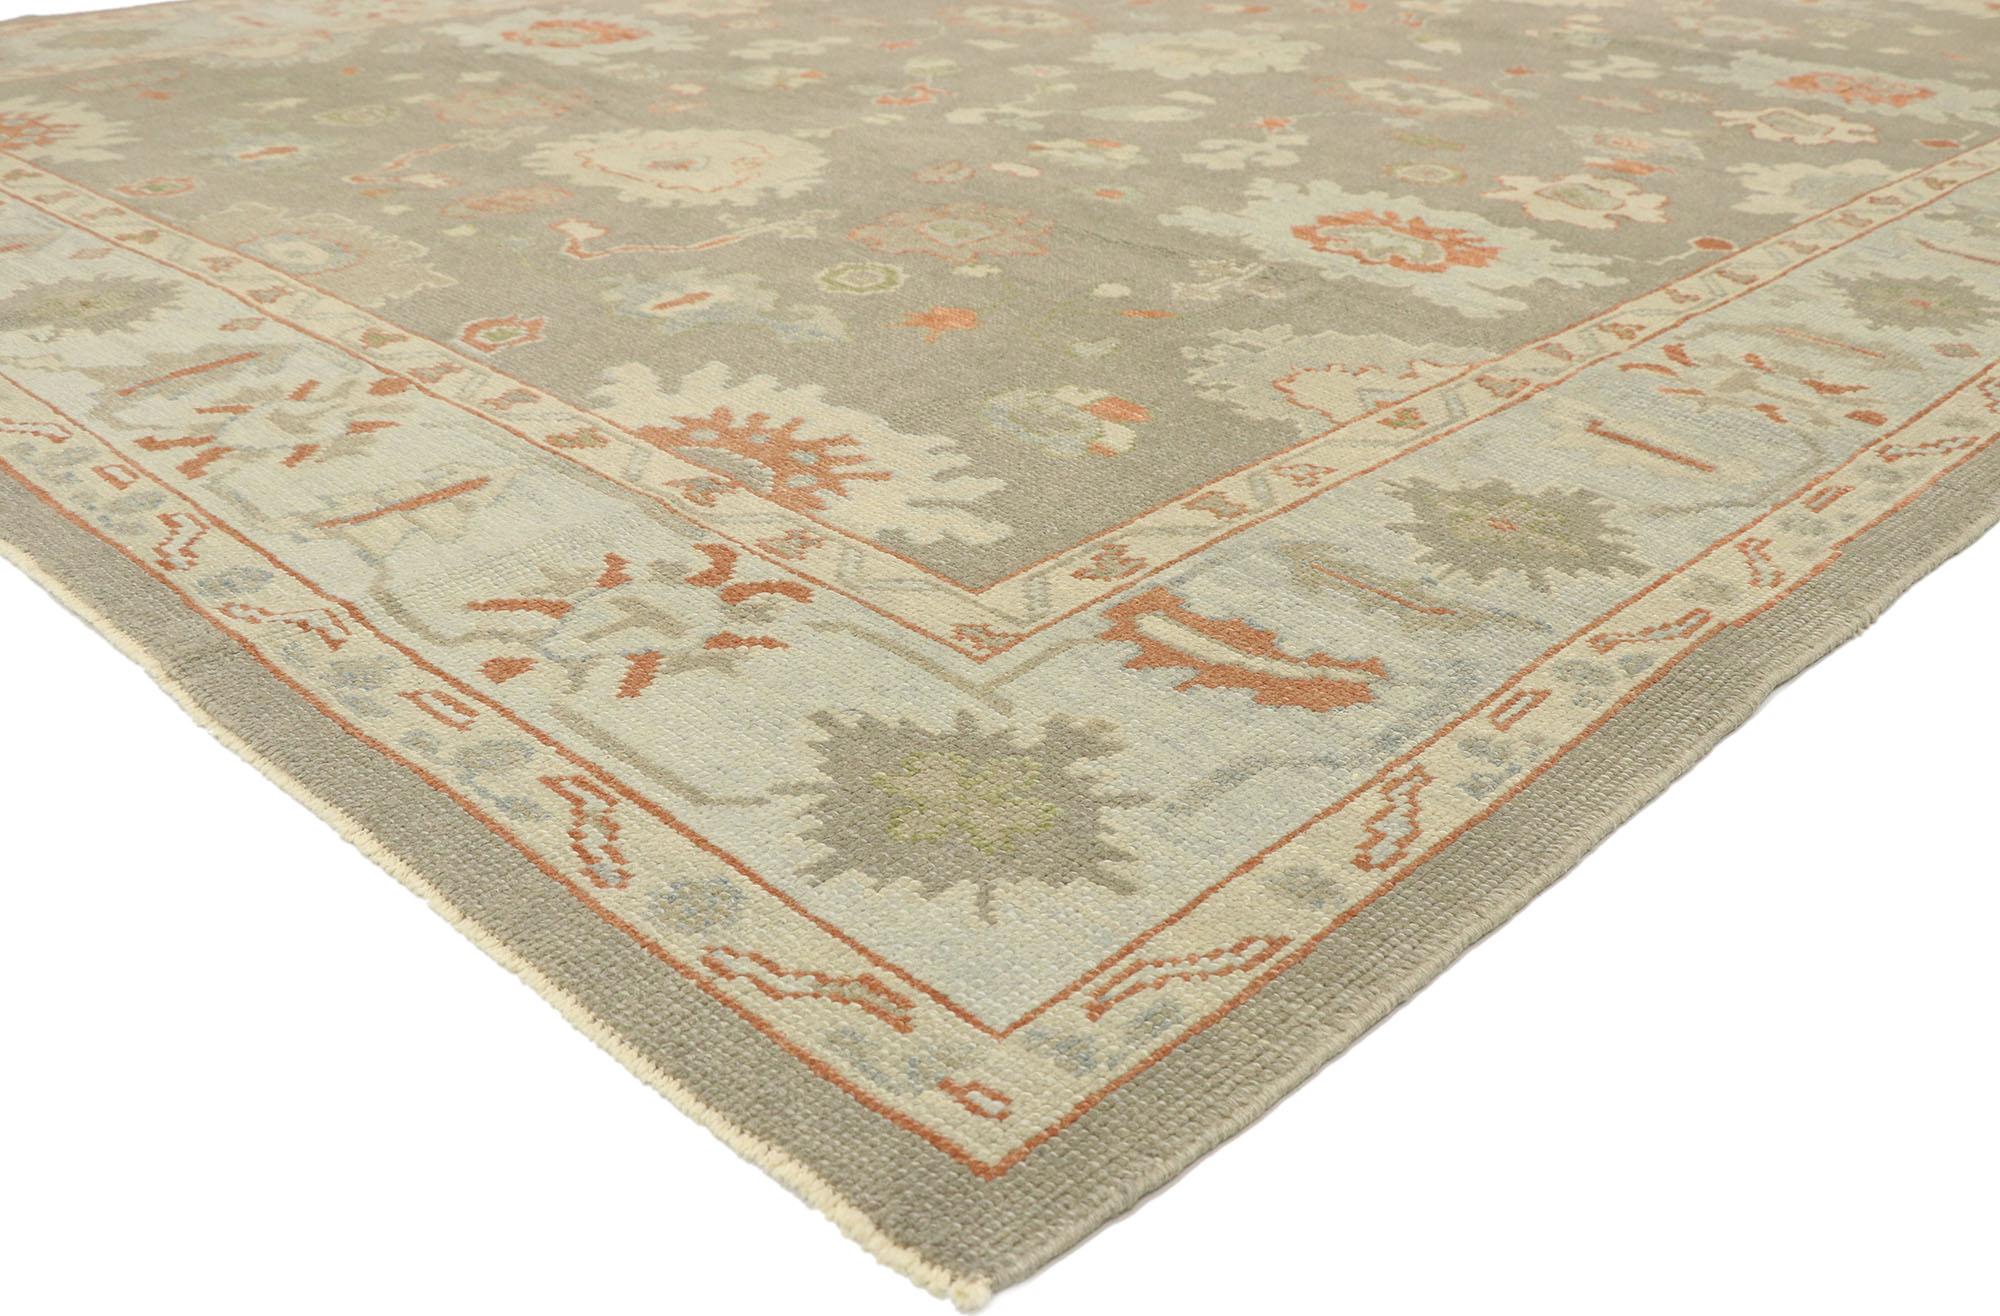 52940, new contemporary Turkish Oushak rug with modern transitional style 09'01 x 11'10. Blending elements from the modern world with neutral colors, this hand knotted wool contemporary Turkish Oushak rug will boost the coziness factor in nearly any